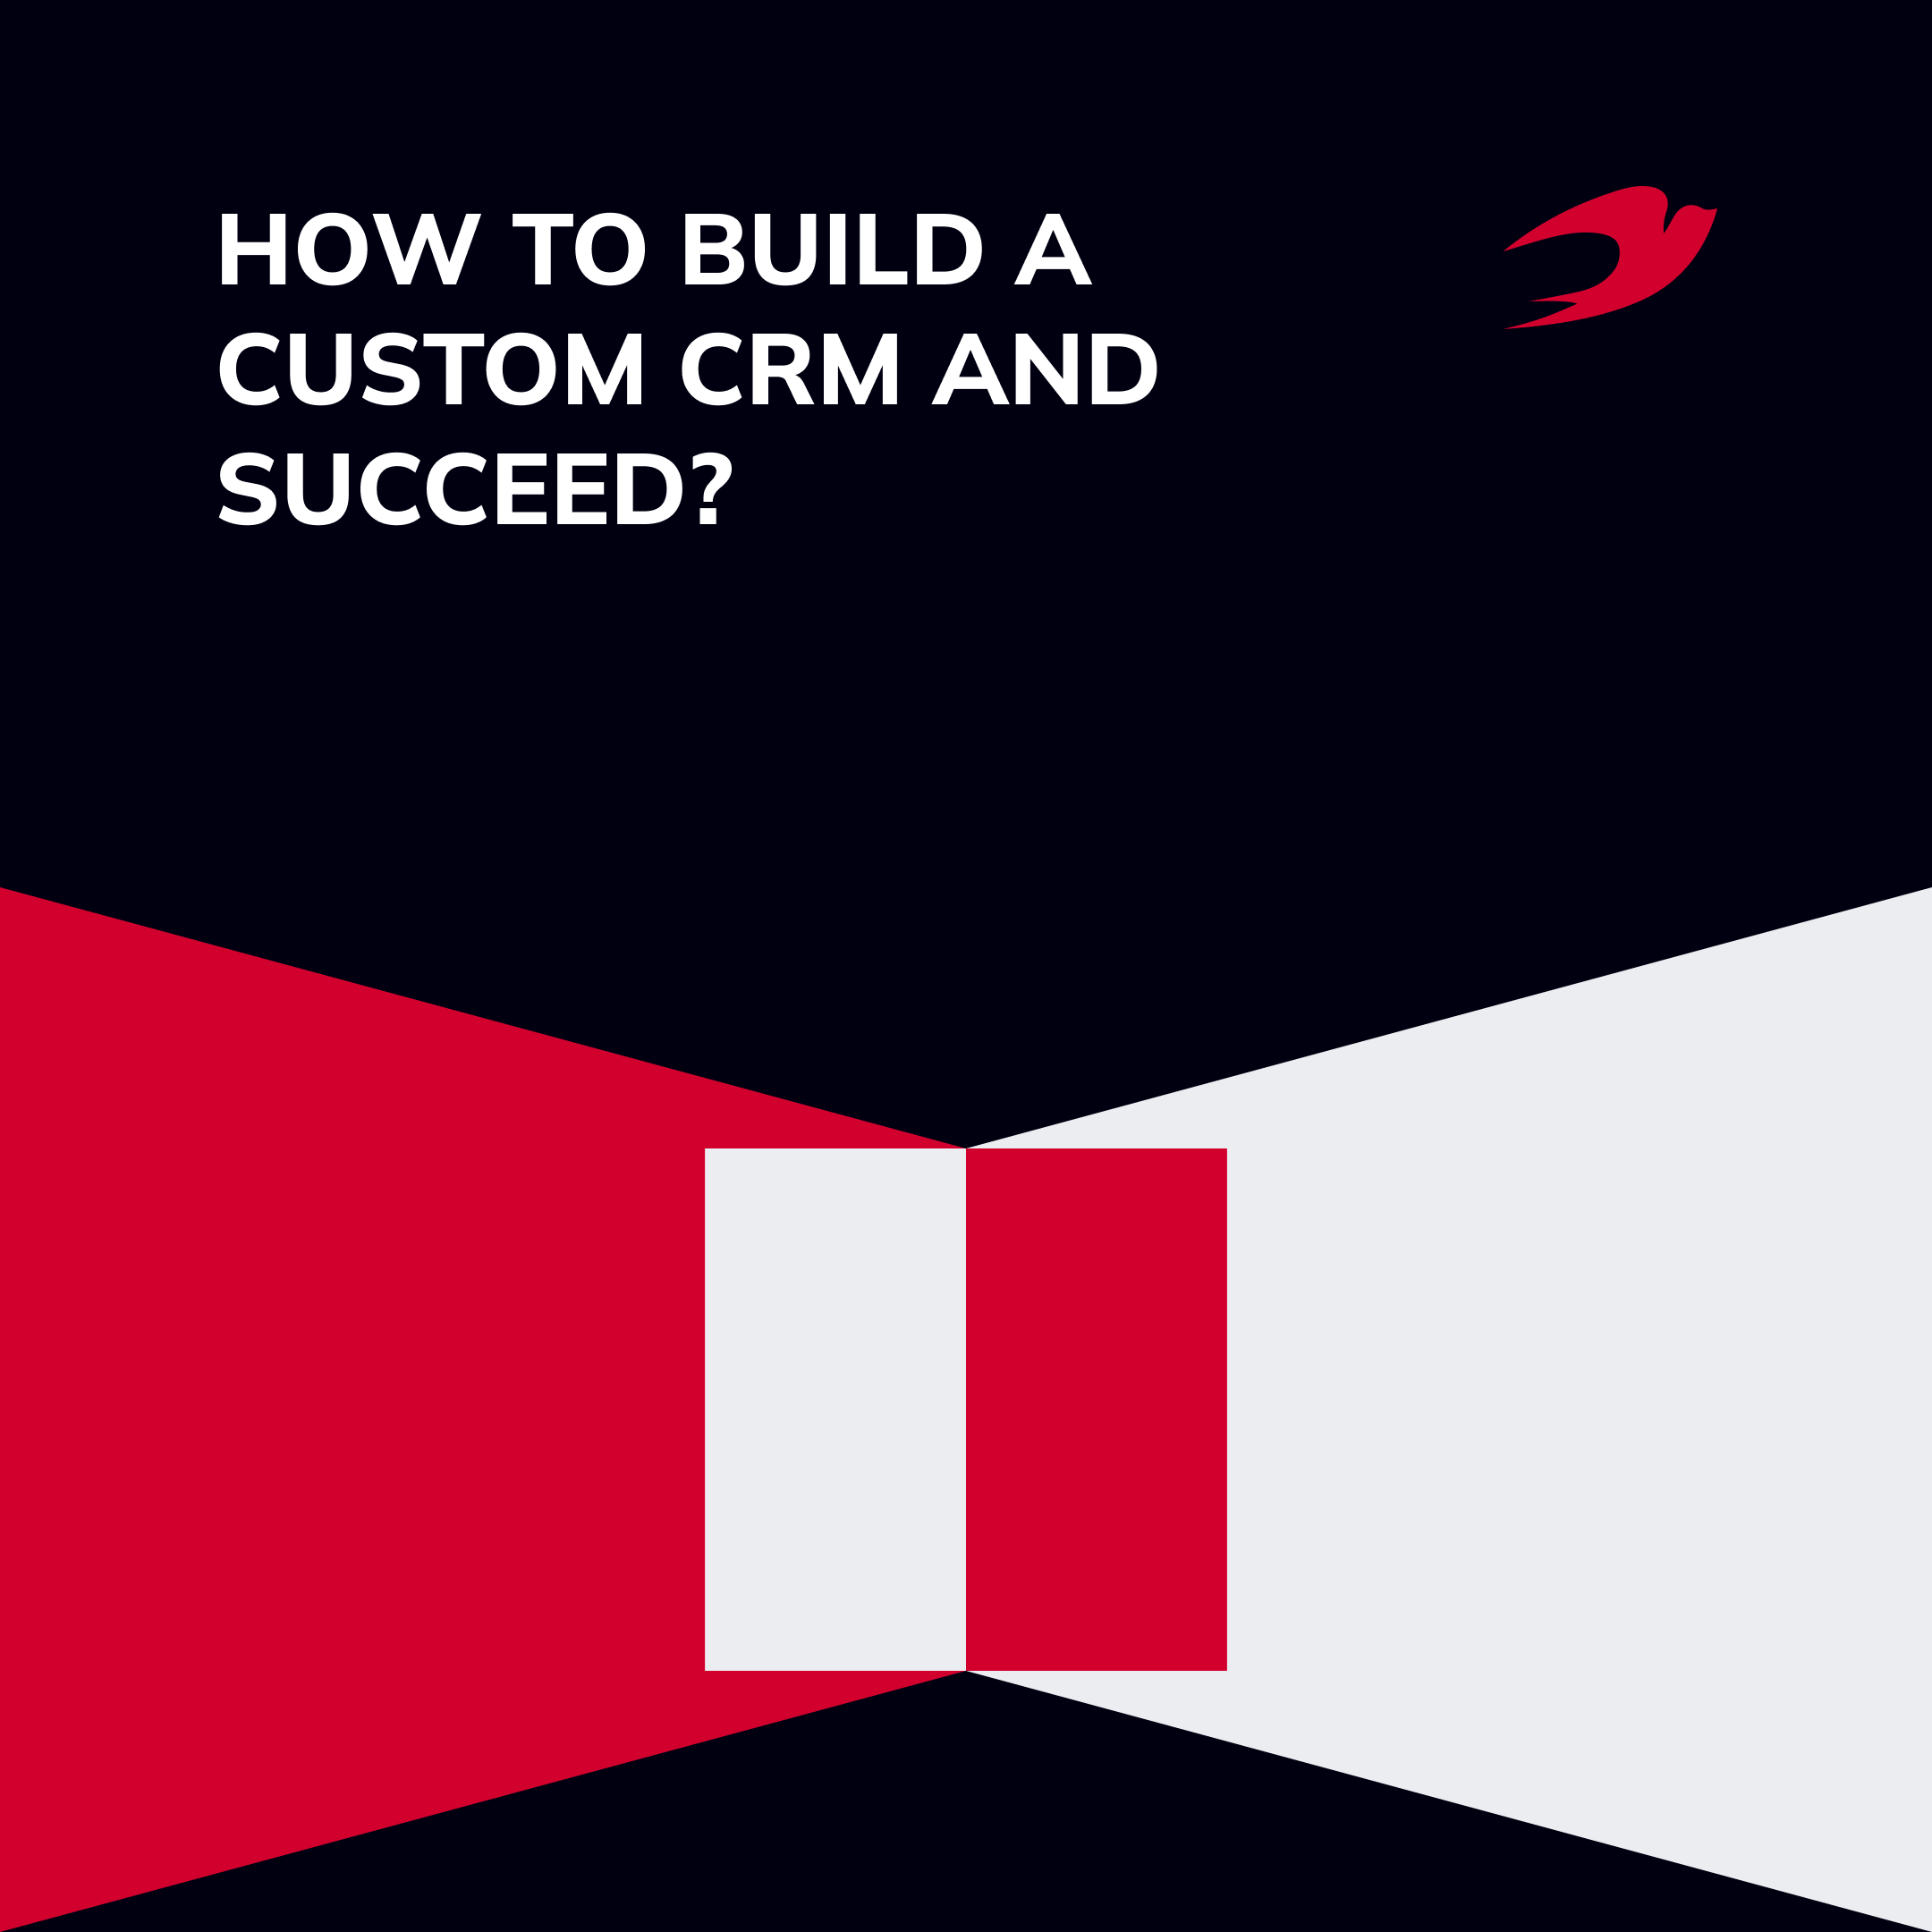 How to Build a Custom CRM and Succeed